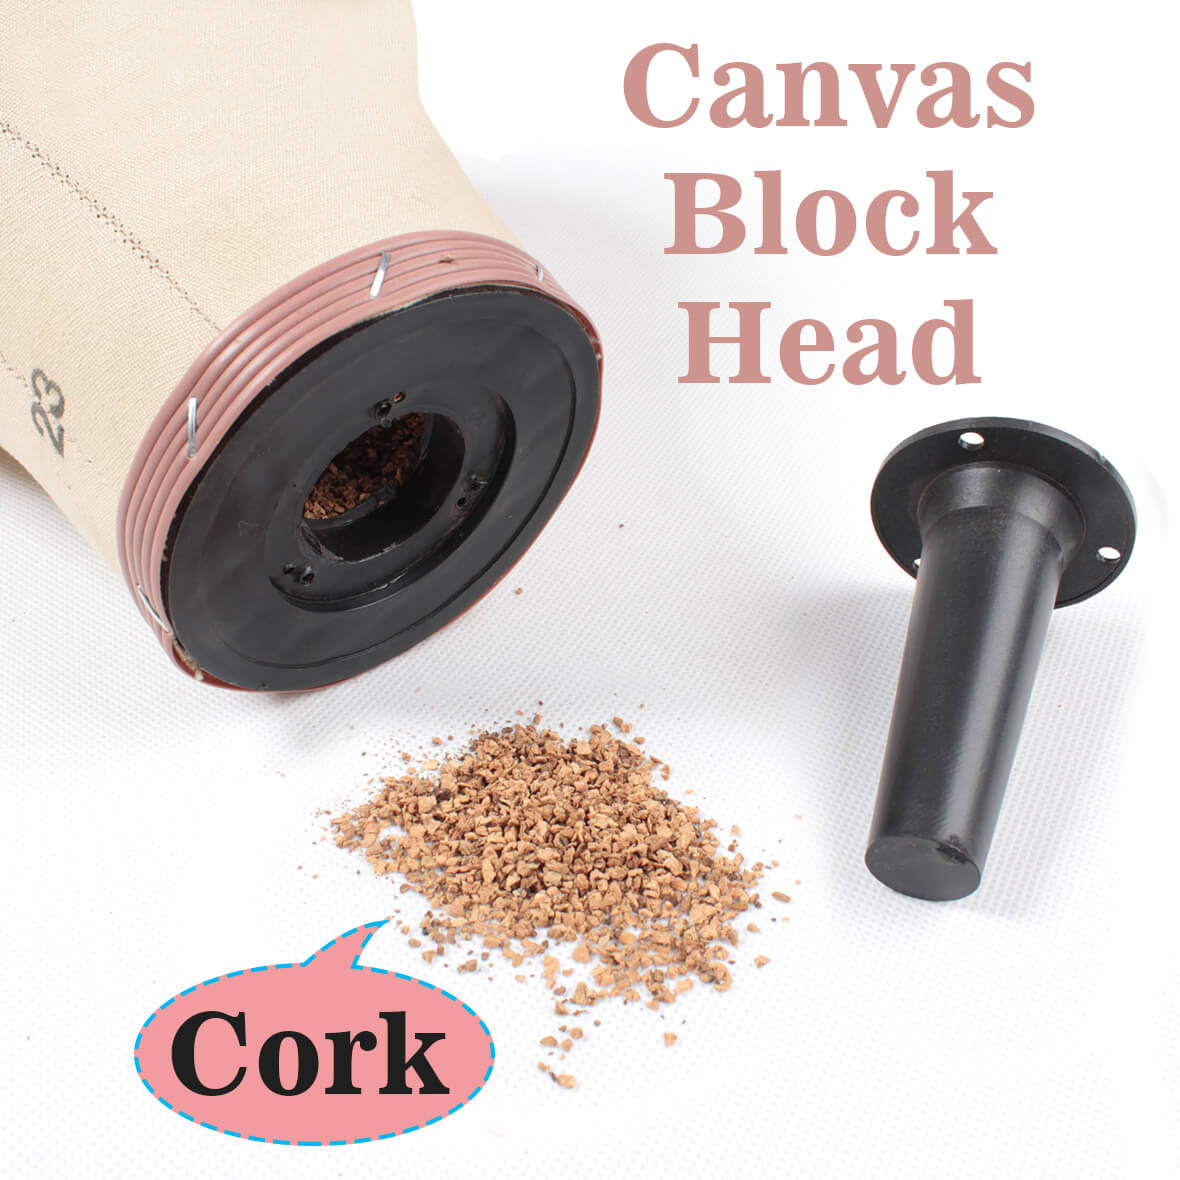 21-23 High Quality Cork Canvas Block Head for Wigs. Xtrendhair